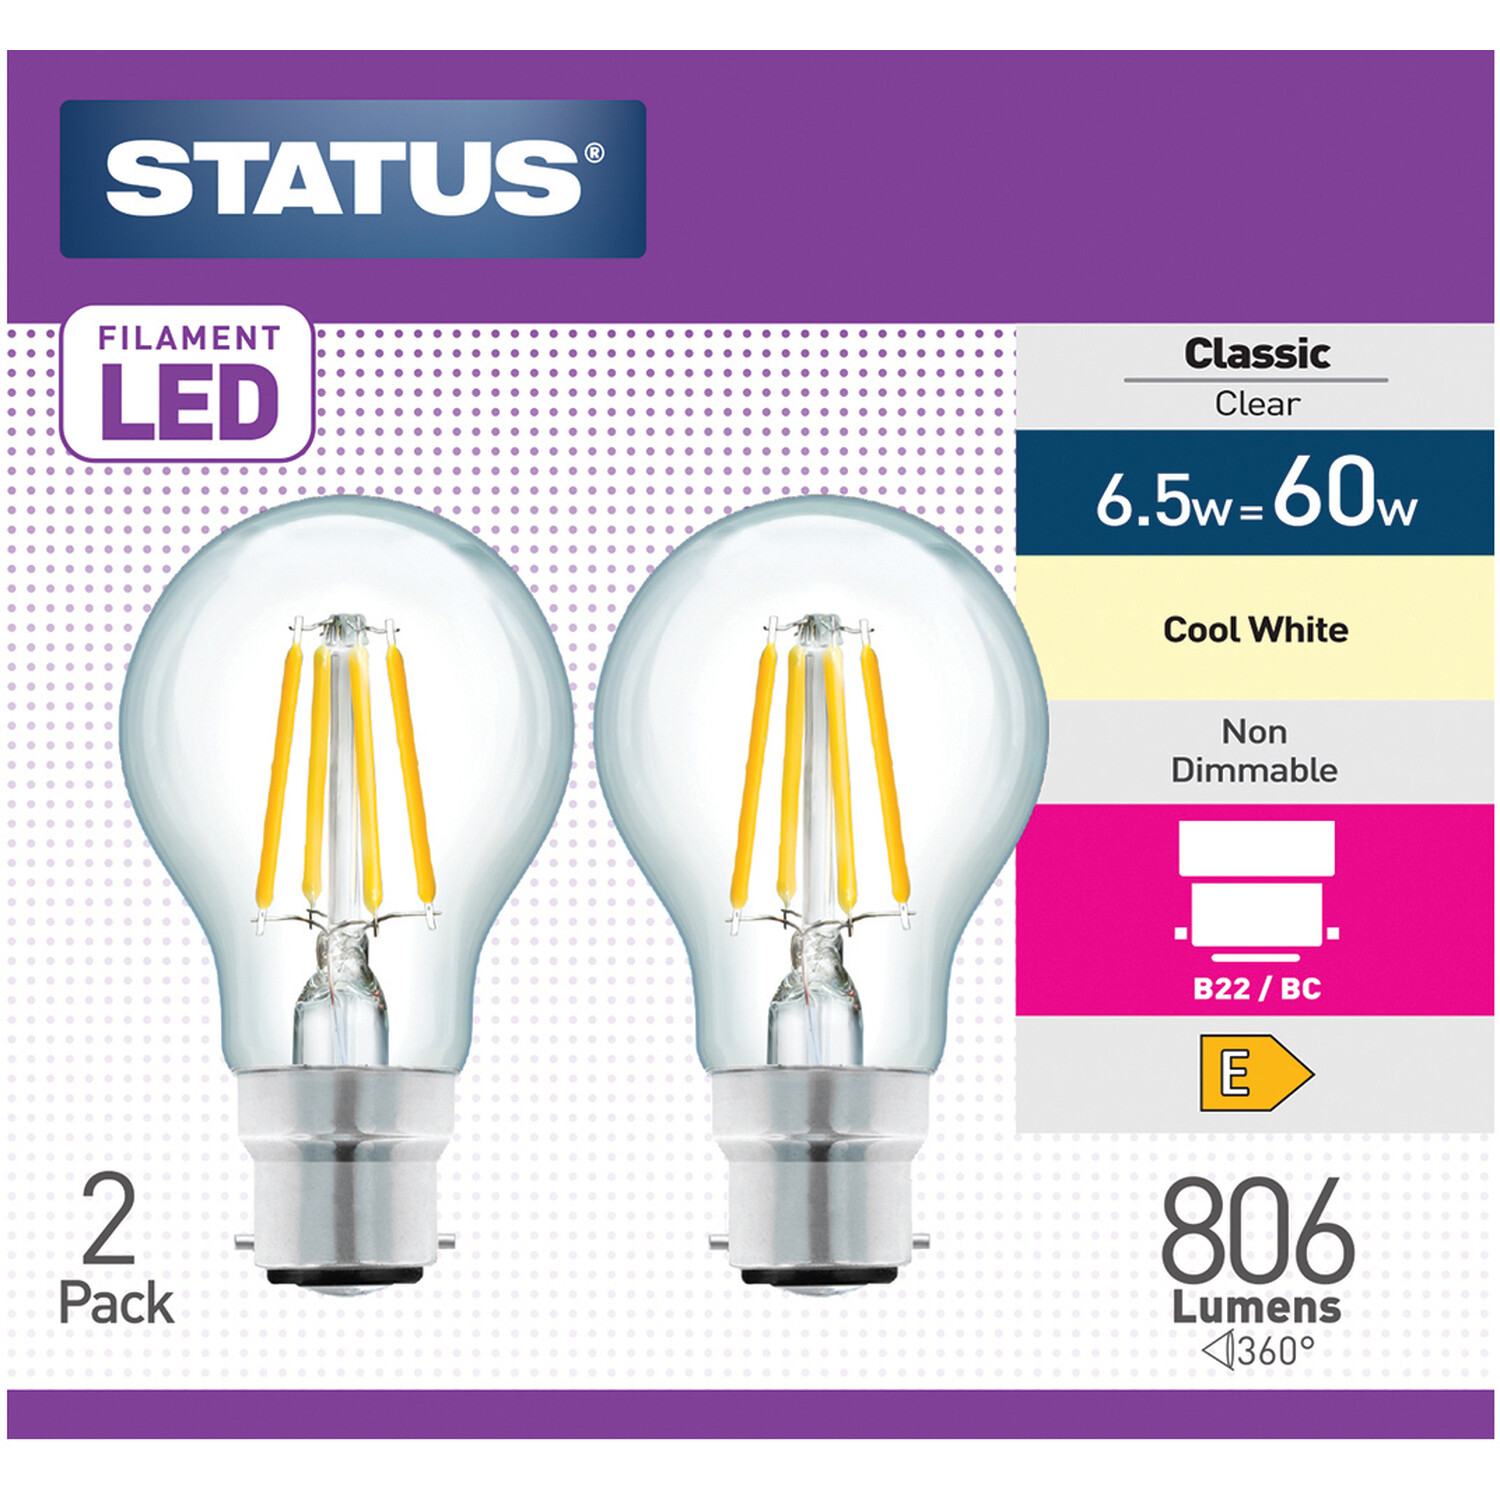 Pack of 2 Status Filament LED Classic Clear Cool White Lightbulbs Image 1